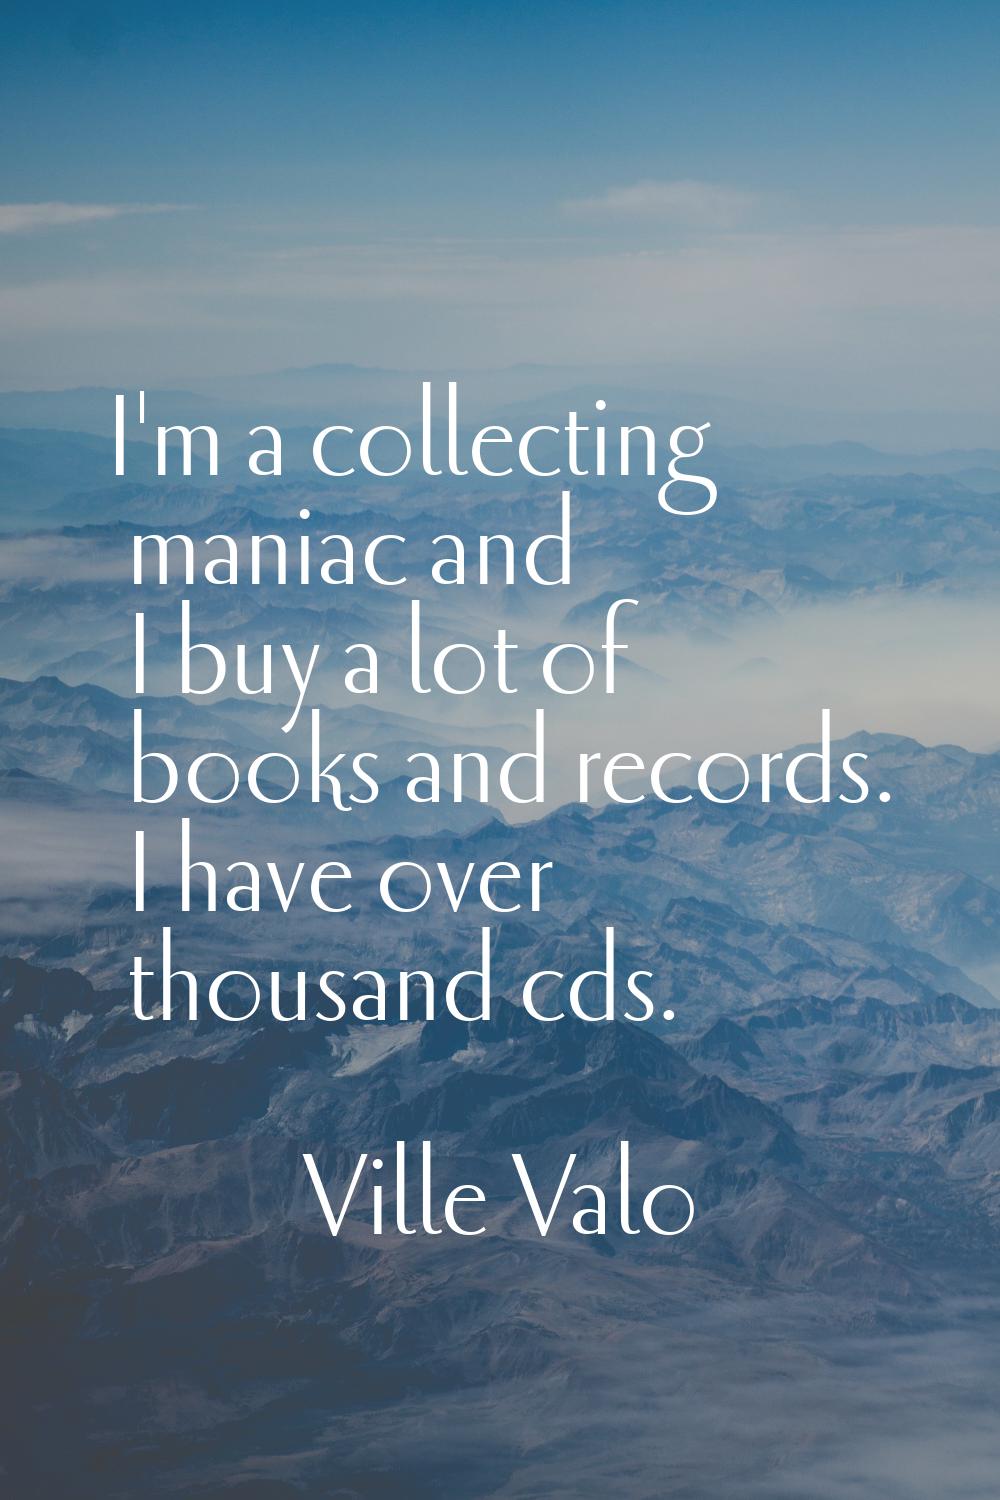 I'm a collecting maniac and I buy a lot of books and records. I have over thousand cds.